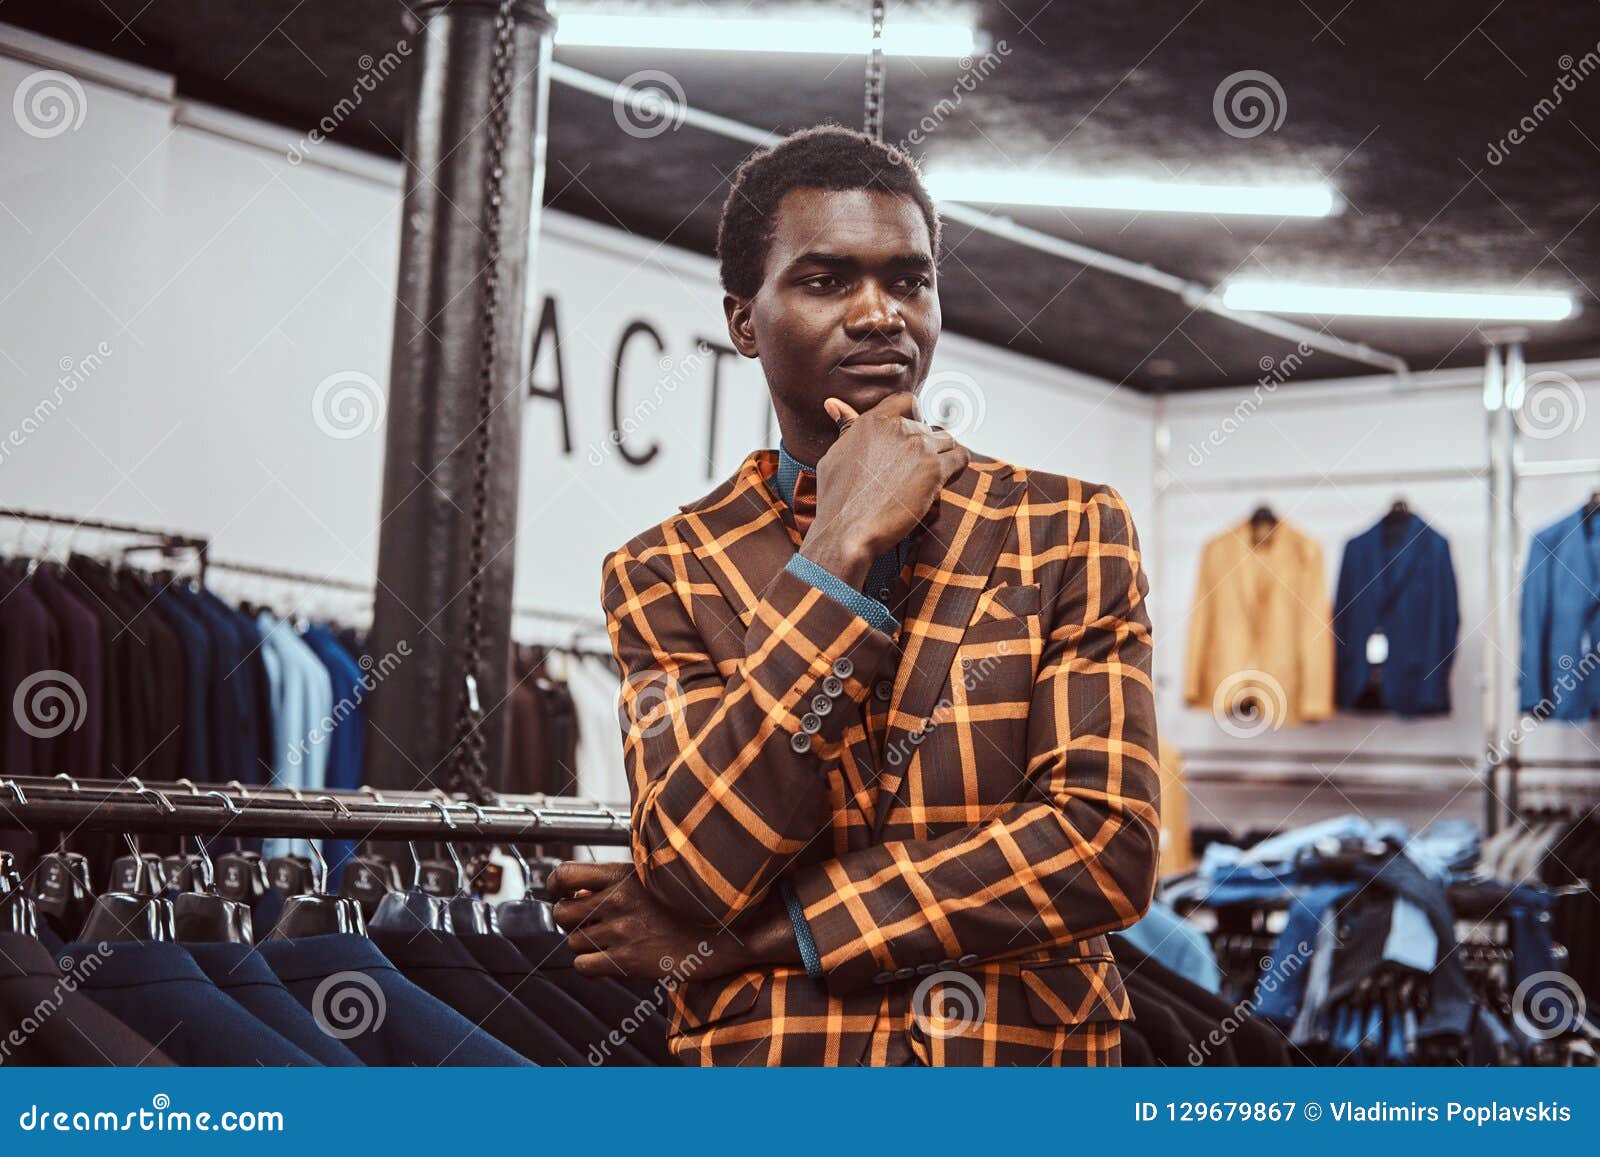 Elegantly Dressed African Man Posing with Hand on Chin while Standing ...